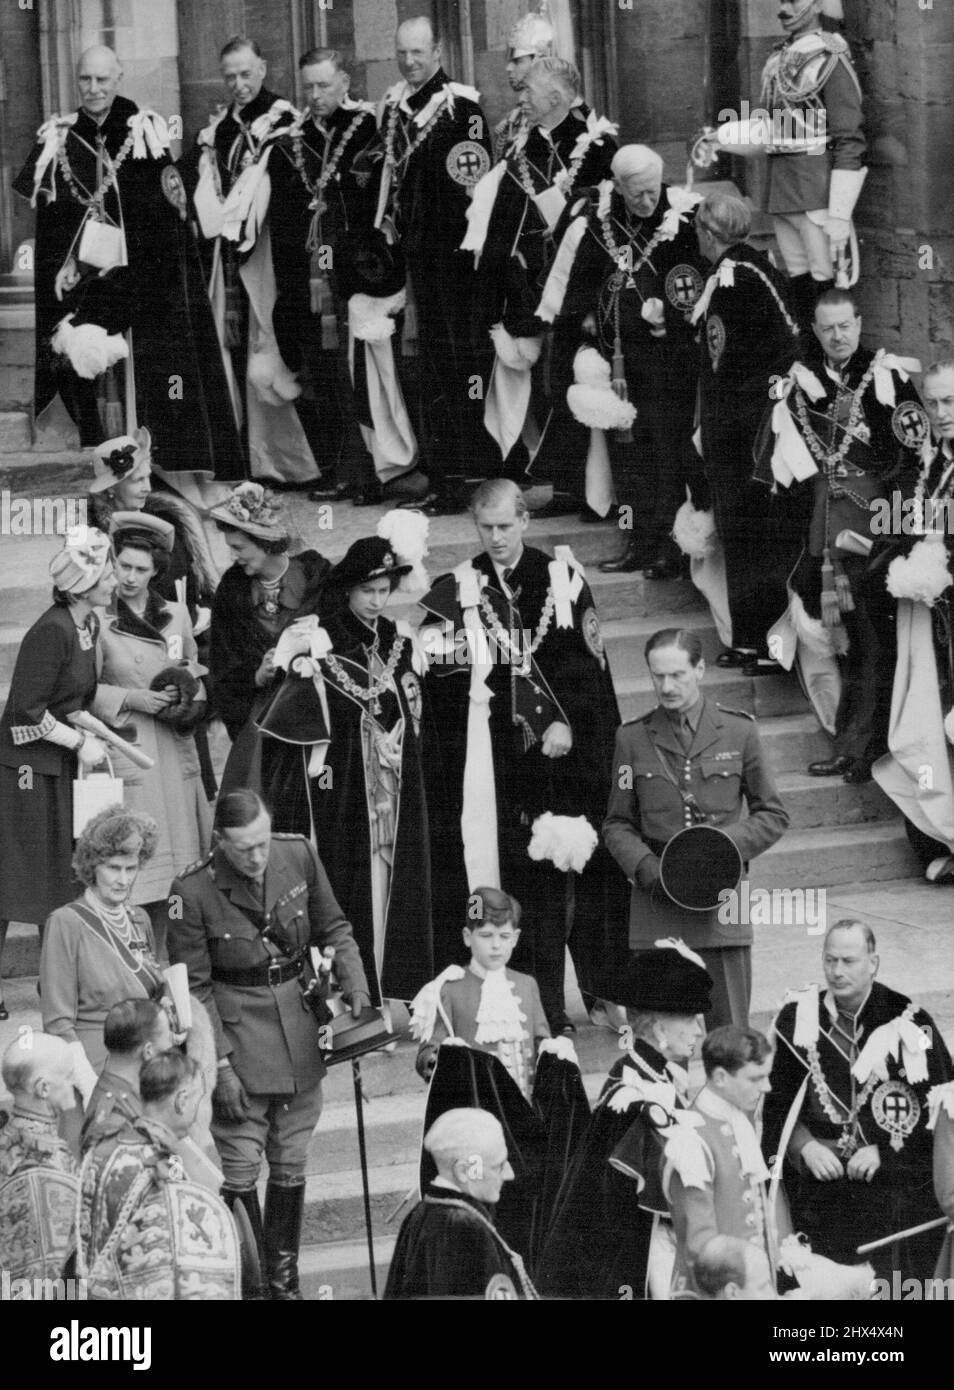 Princess And Duke Leave St. George's -- Her royal highness Princess Elizabeth and her husband, the Duke of Edinburgh, robed as knights of the garter, seen leaving the St. George's chapel after the ceremony today April 23. At bottom of picture is Queen Mary escorted by the Duke of Gloucester (right). Behind Princess Elizabeth are (left to right) Duchess of Gloucester, Princess Margaret, and Duchess of Kent. Among the Knights lining the steps are the Earl of Athlone (top left); Duke of Norfolk (third from left); and Field Marshal Viscount Alexander (extreme right). A brilliant ceremony took plac Stock Photo